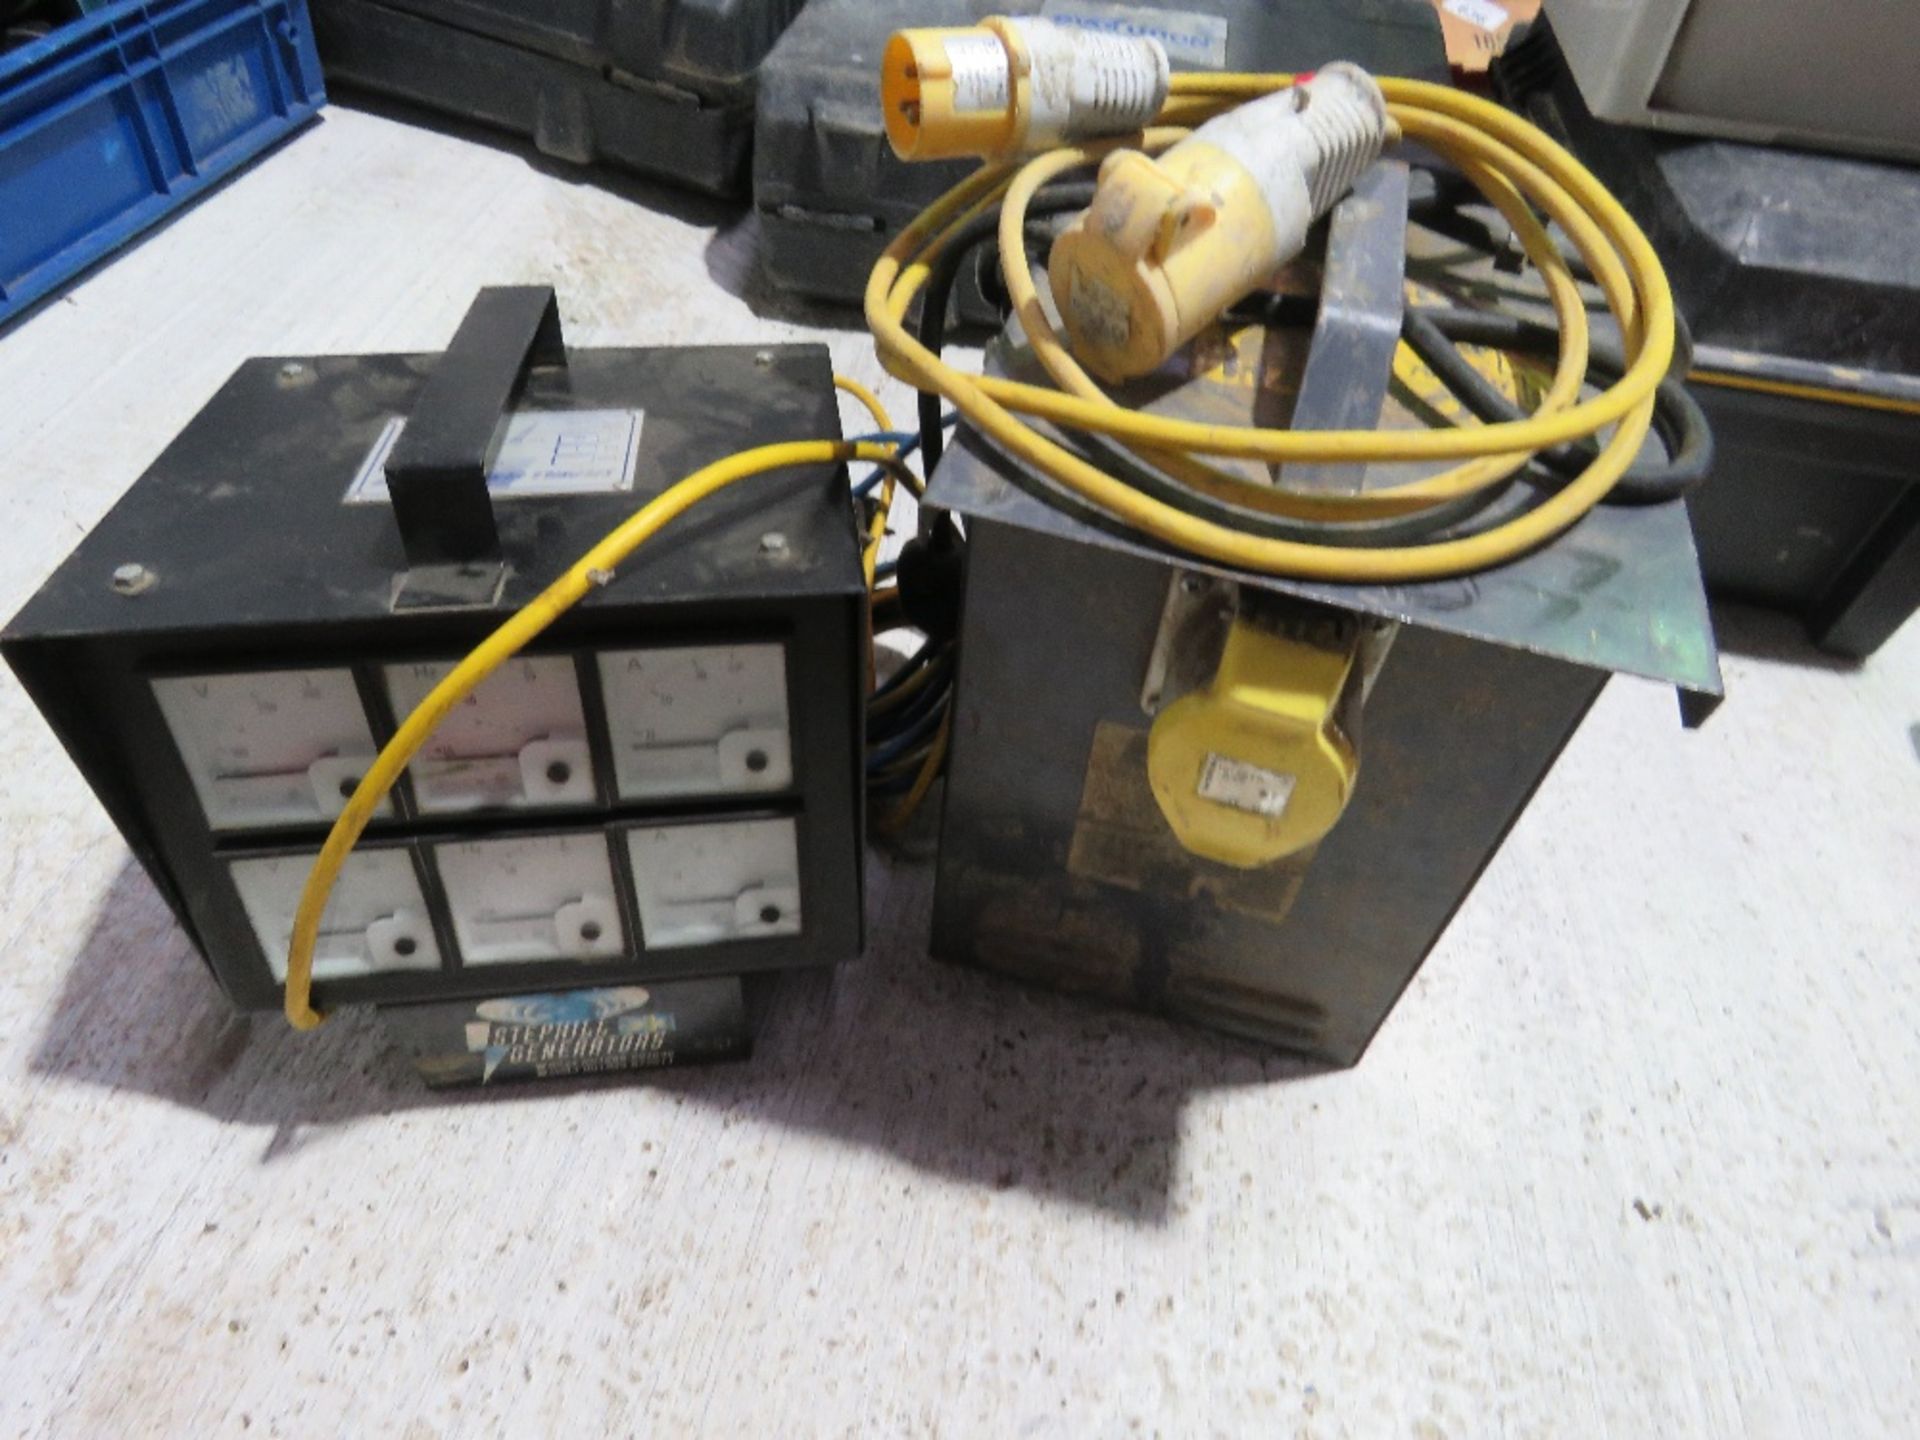 TRANSFORMER PLUS A STEPHILL GENERATOR TESTER UNIT.....THIS LOT IS SOLD UNDER THE AUCTIONEERS MARGIN